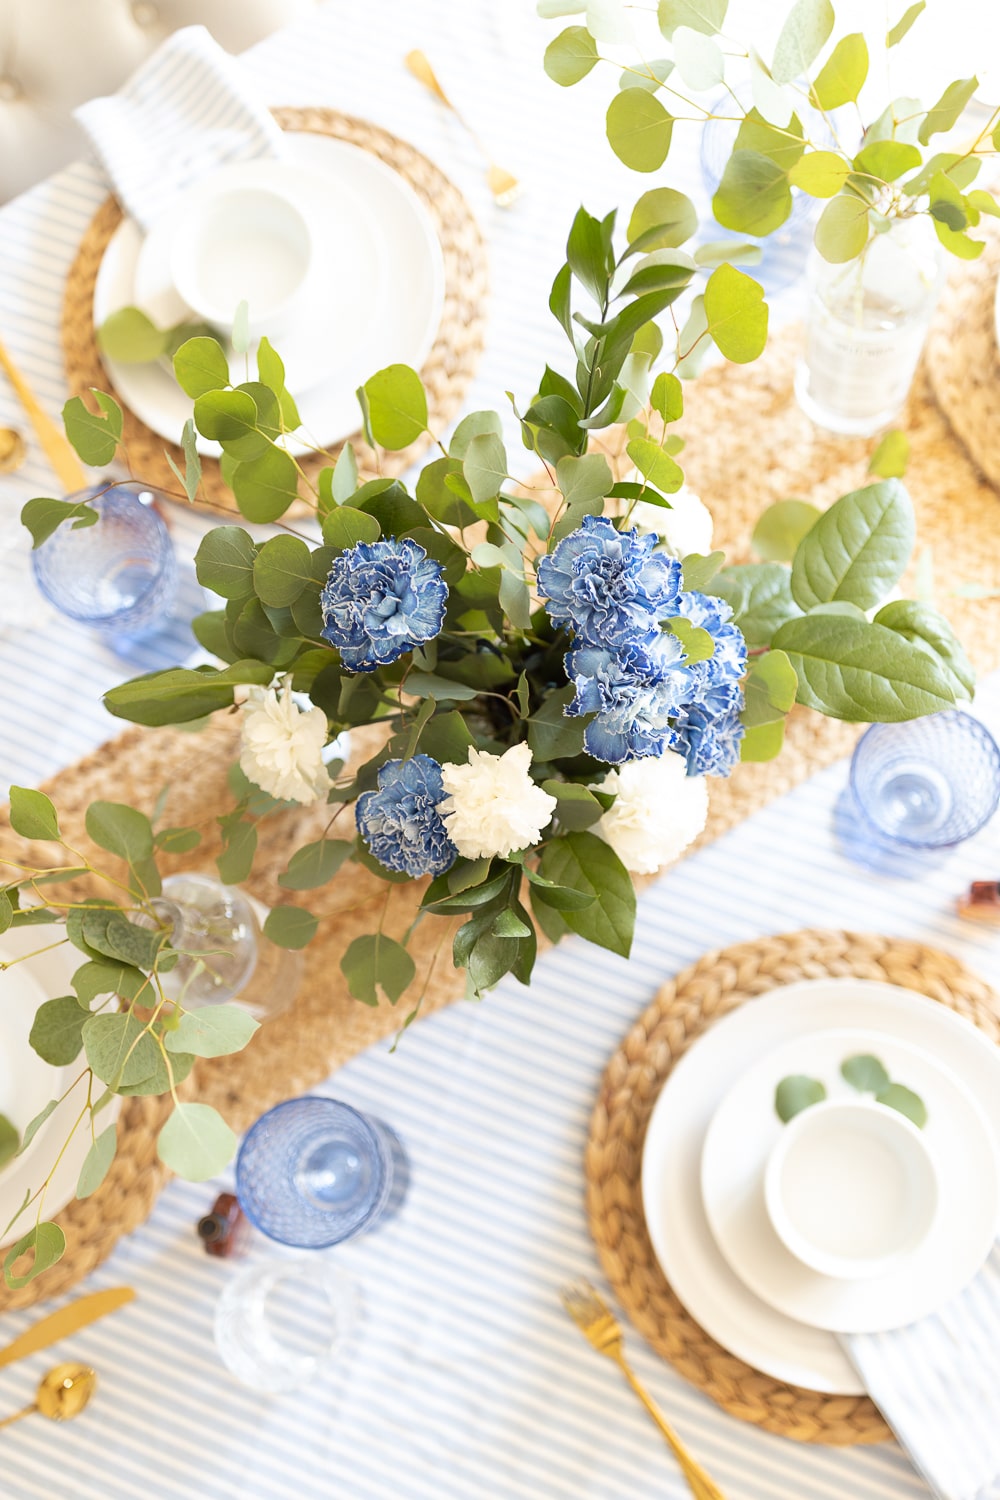 Father's Day table setting designed by blogger Stephanie Ziajka on Diary of a Debutante